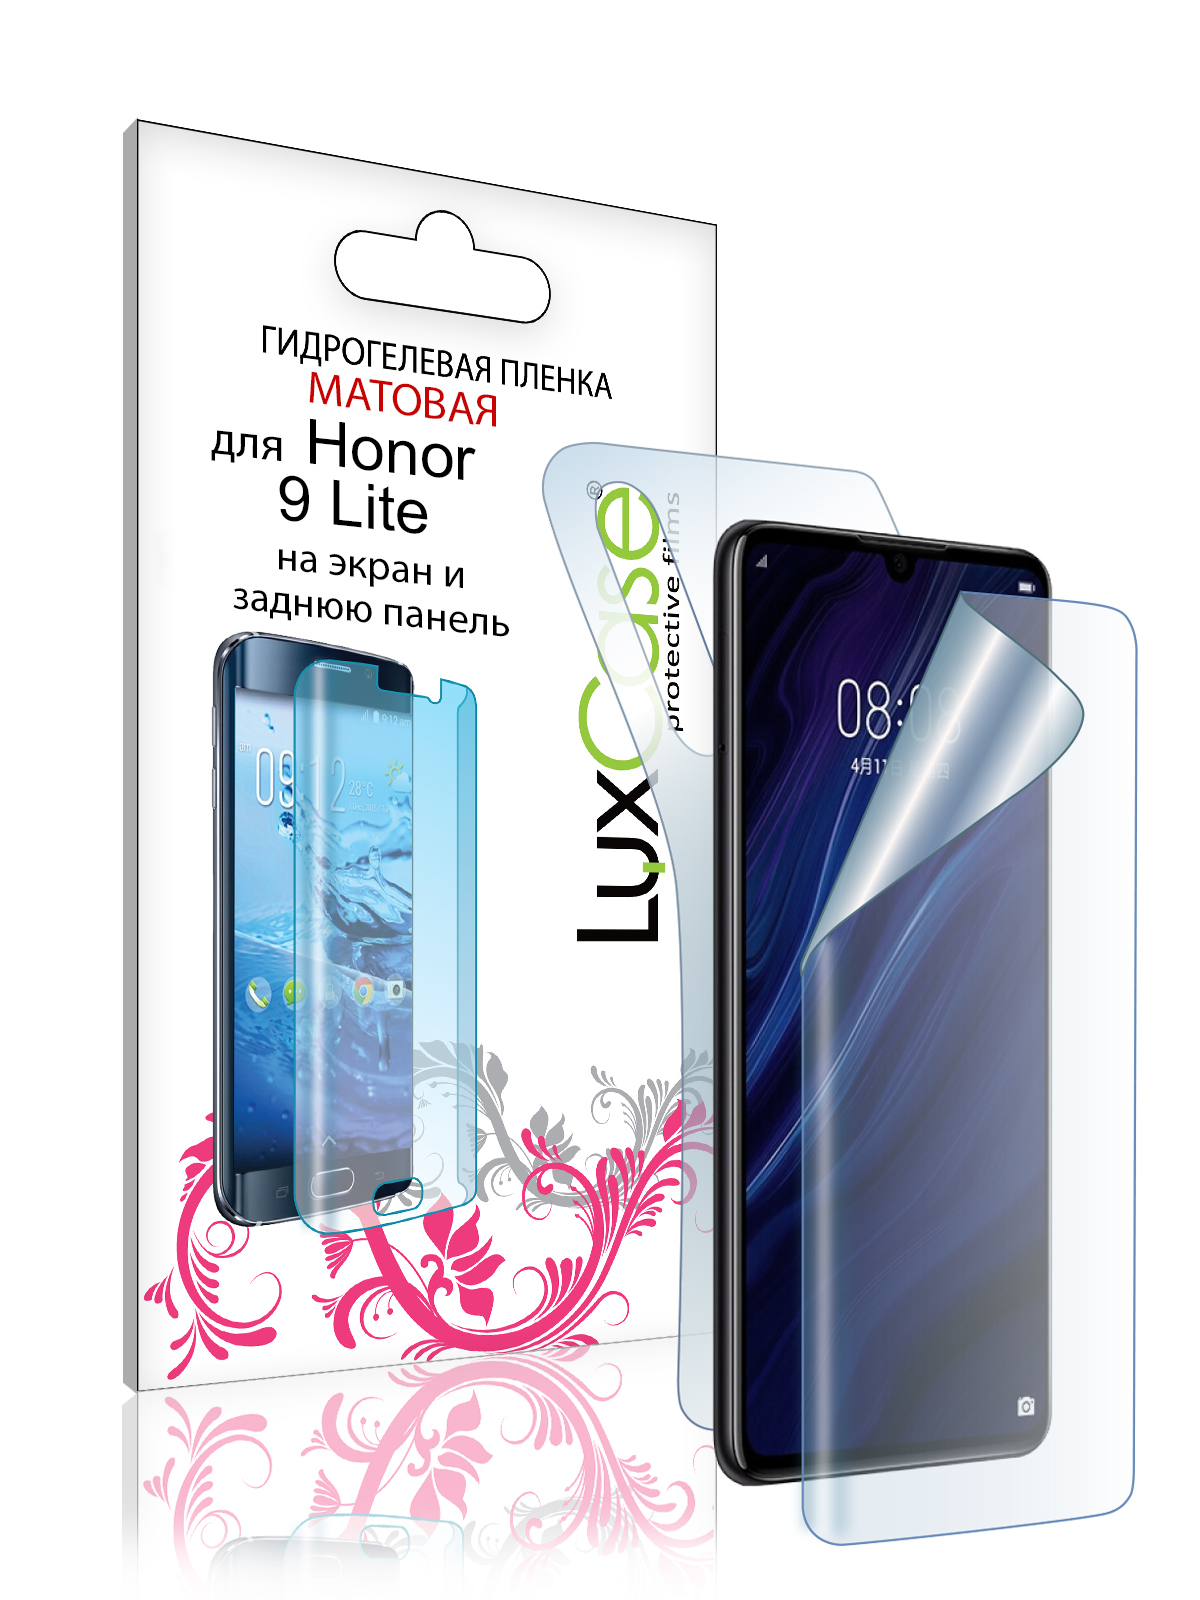 Гидрогелевая пленка LuxCase для Honor 9 Lite 0.14mm Matte Front and Back 87625 гидрогелевая пленка luxcase для honor 9 lite 0 14mm matte front and back 87625